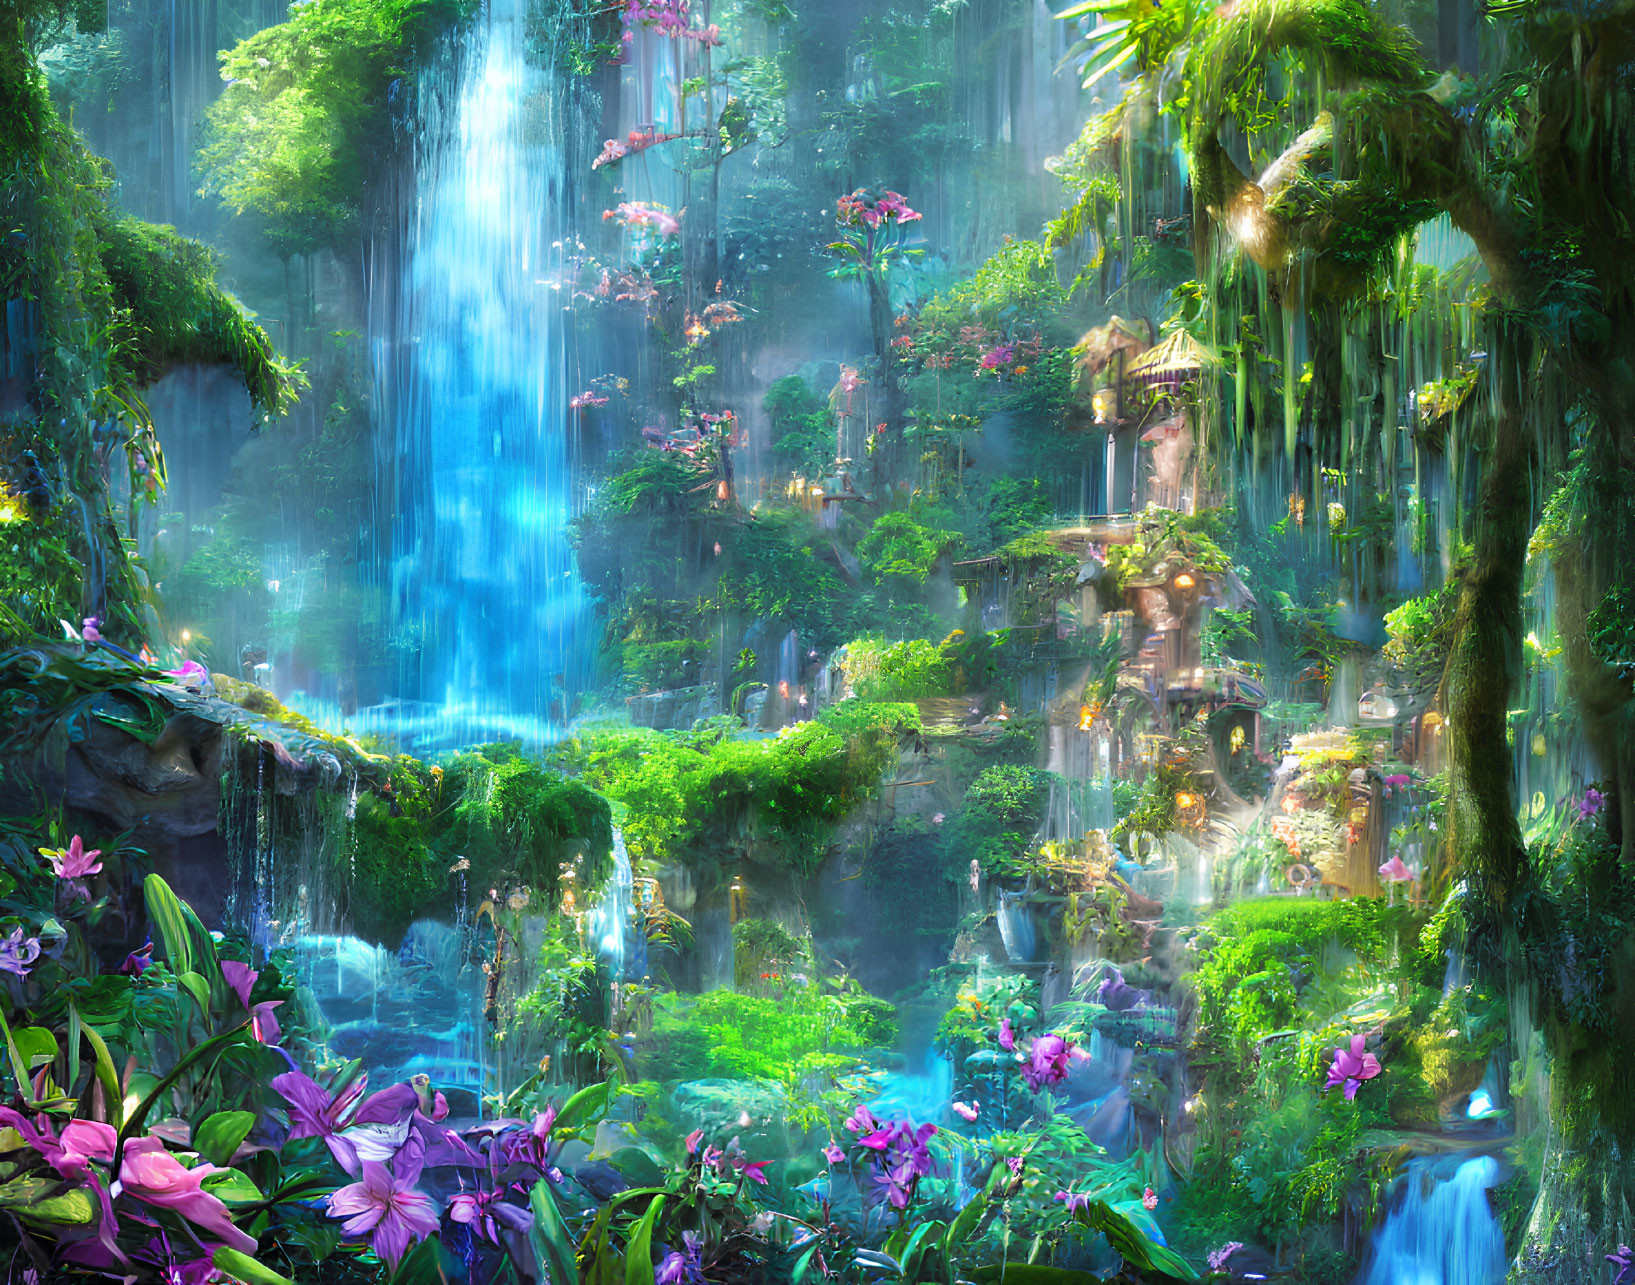 Mystical waterfall cascading into turquoise pool amidst lush foliage and fantastical treehouse-like structures